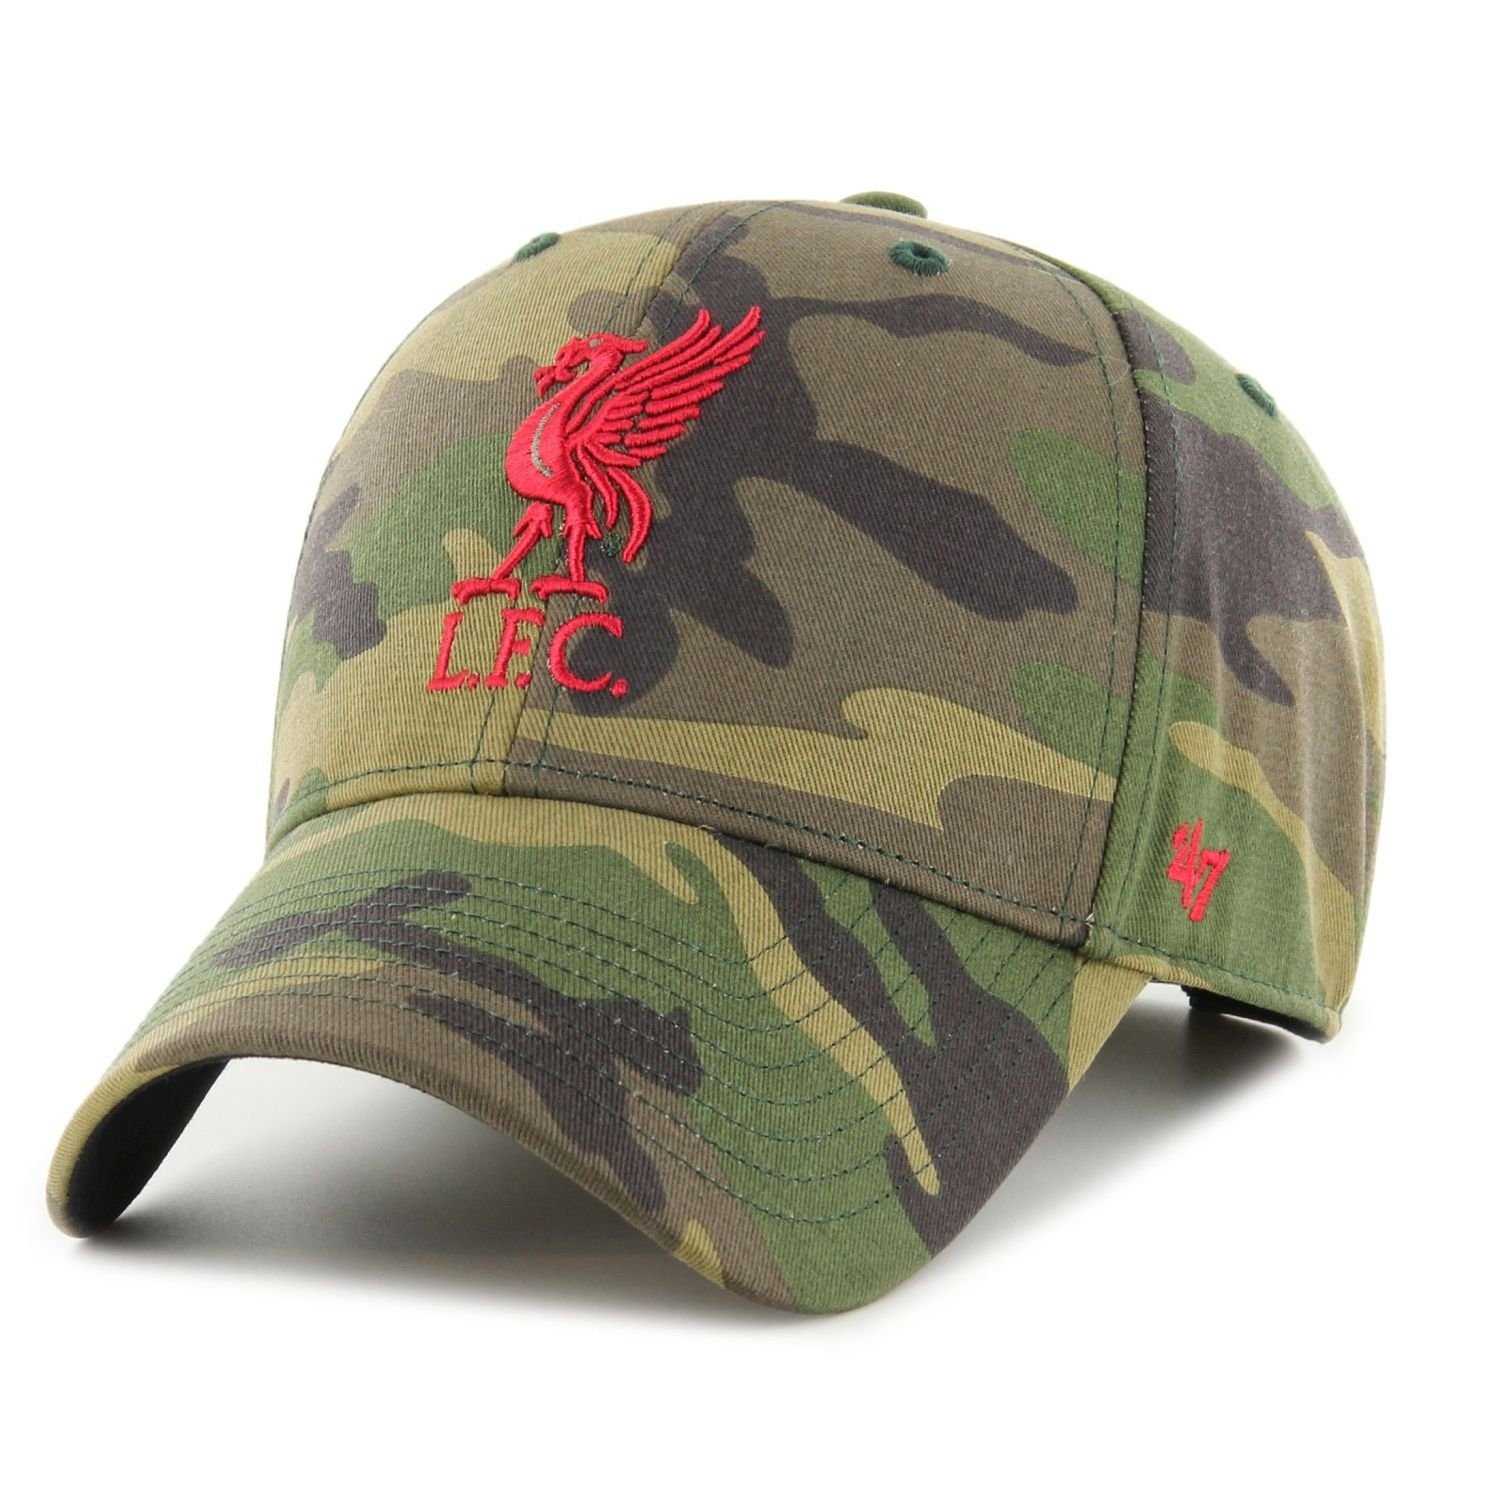 '47 Brand Trucker Cap Relaxed Fit BACK GROVE FC Liverpool